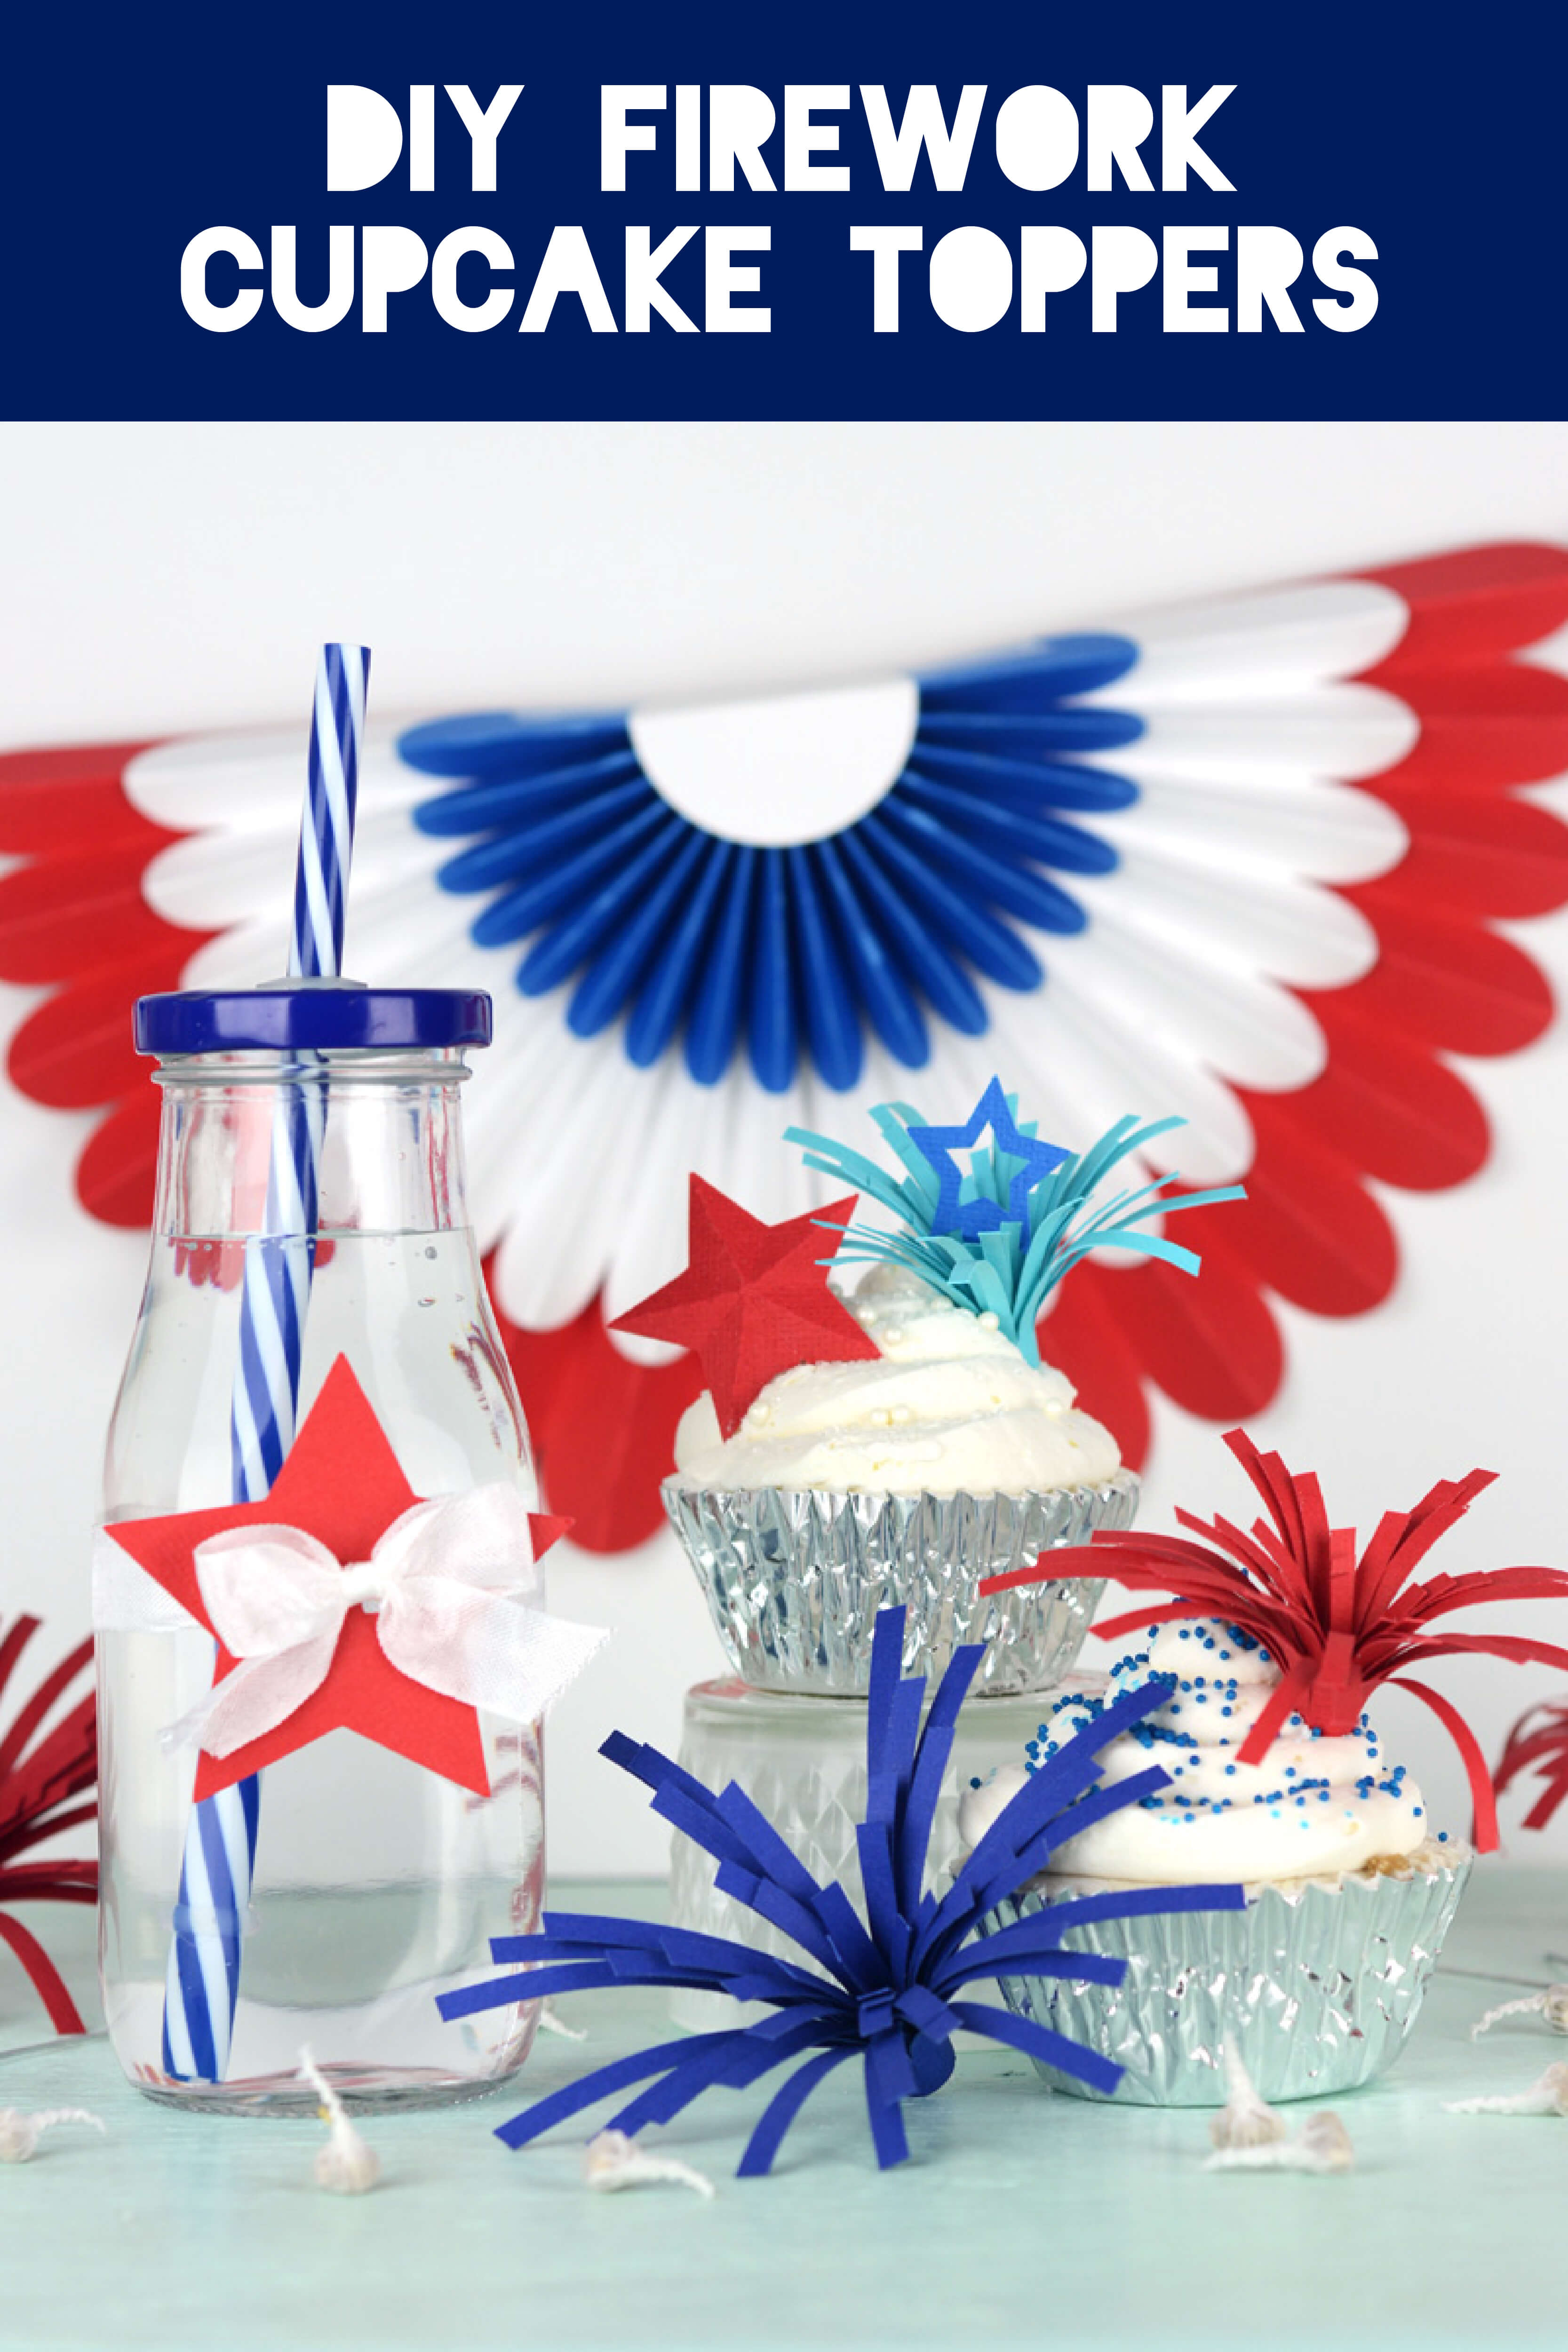 Learn how to make these adorable DIY Firework Cupcake Toppers by Amy Robison on Love the Day